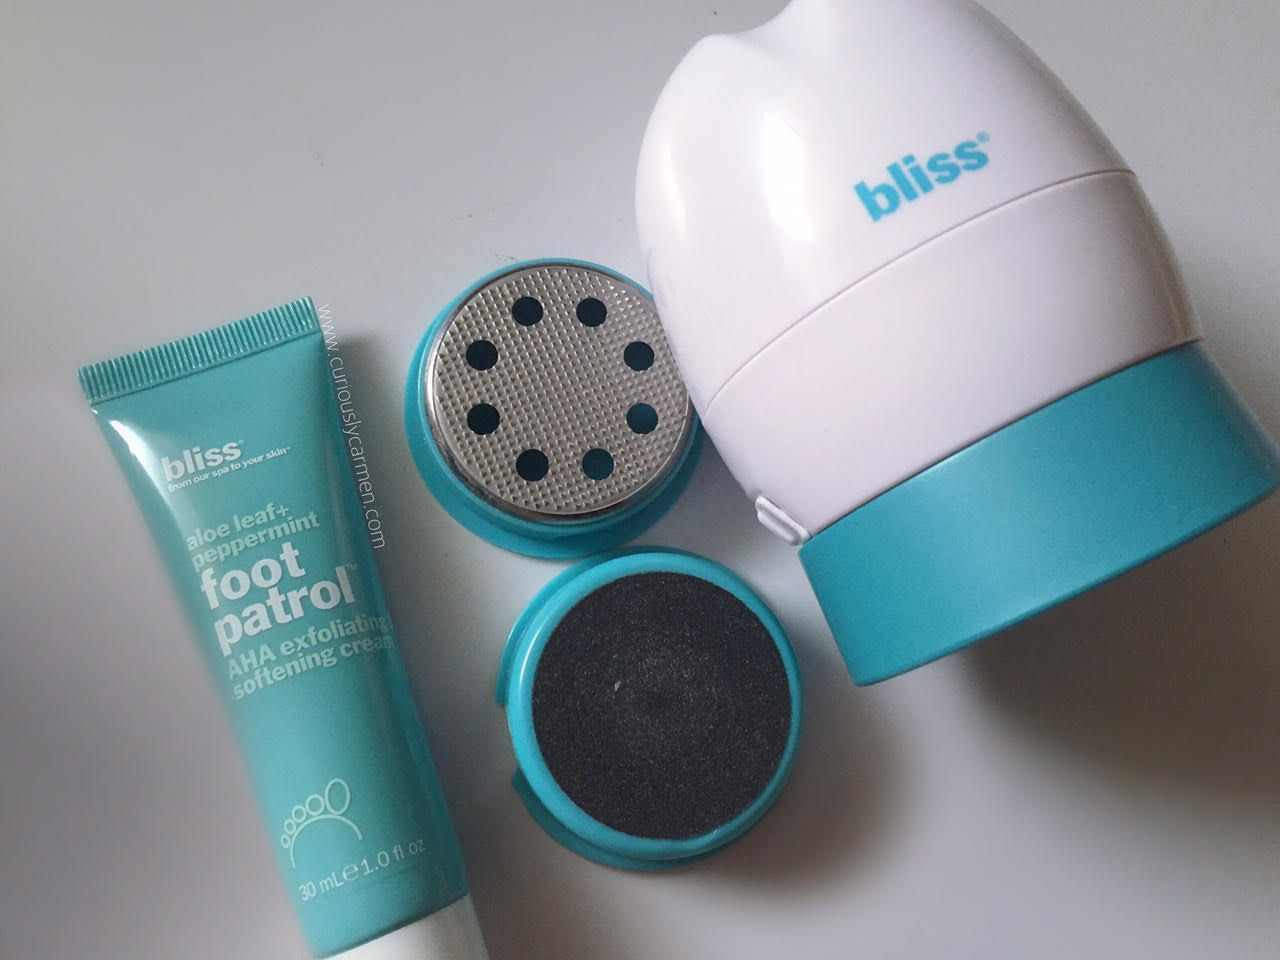 Bliss Heel Smoother Kit